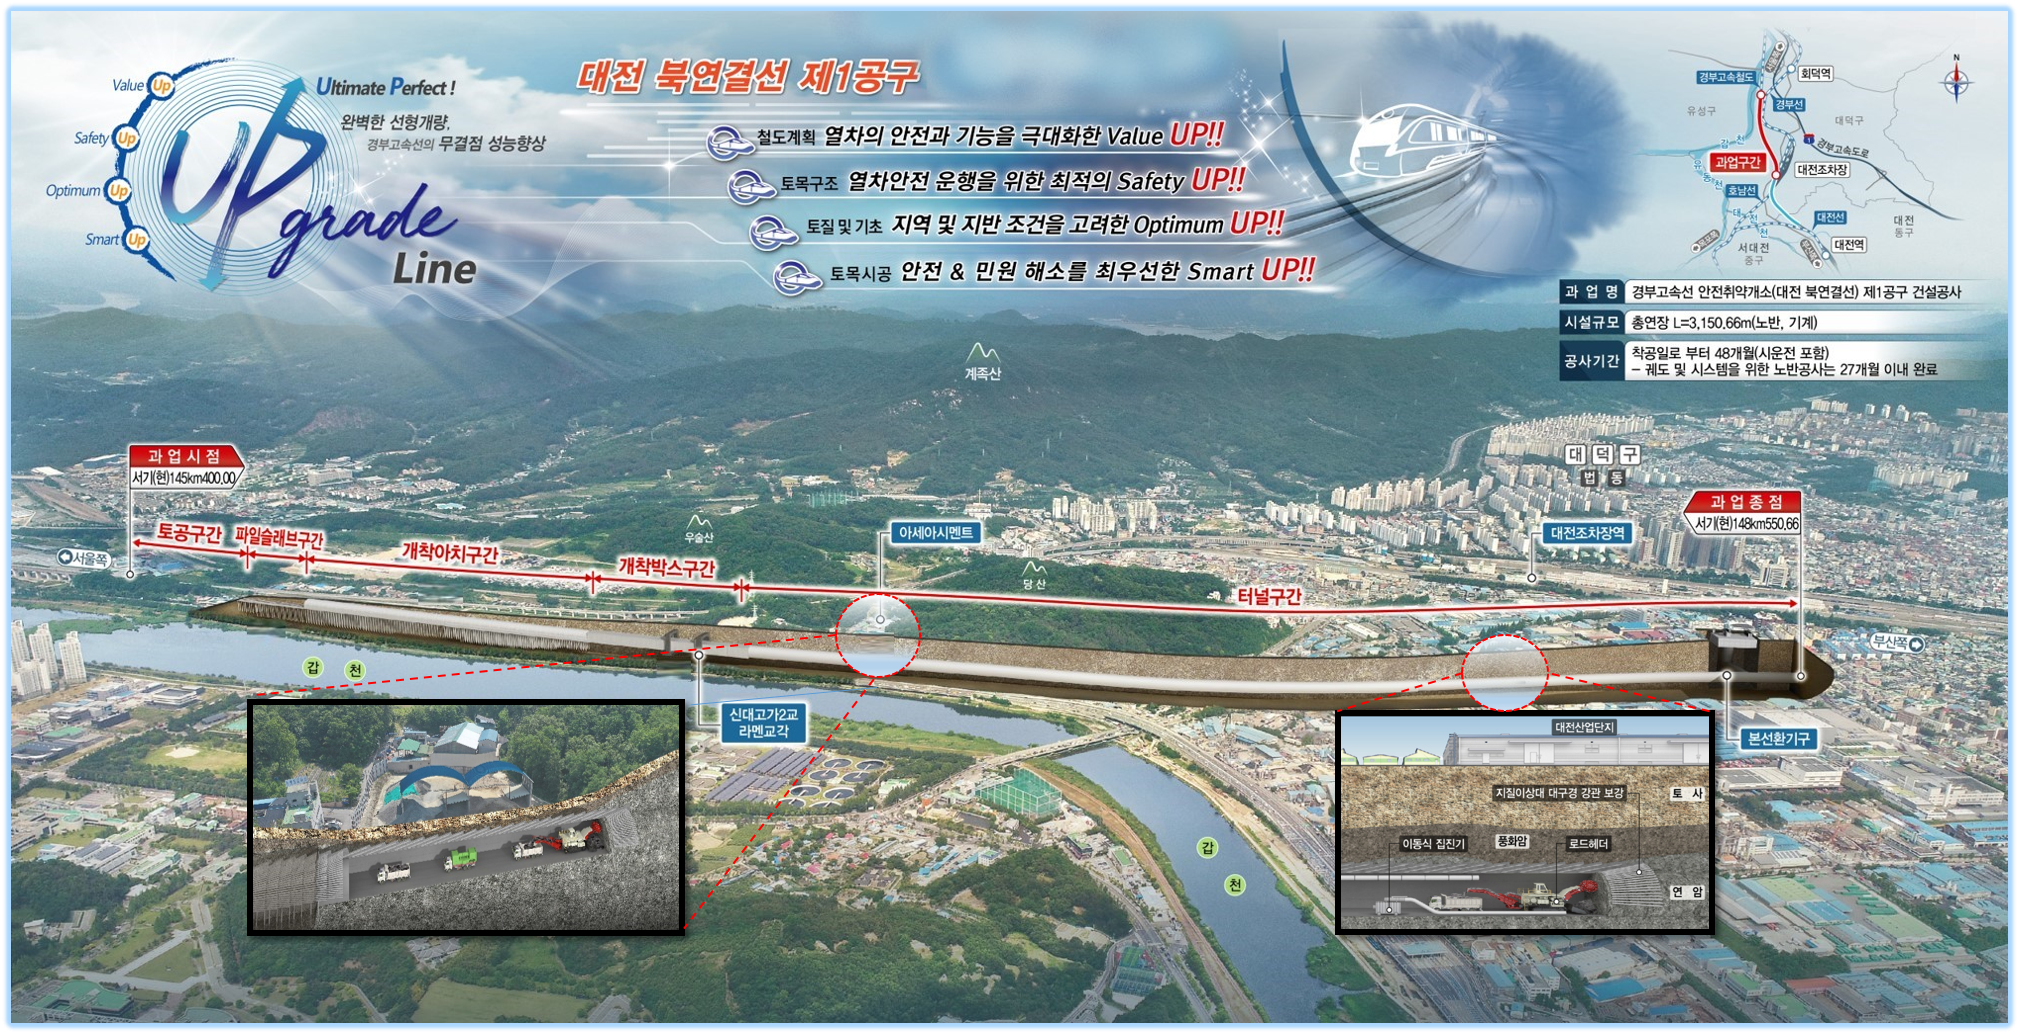 Design and Construction Batch Bidding Detailed Design for Gyeongbu High-Speed Line Safety Vulnerable Areas (Daejeonbuk Connecting Line) Sect